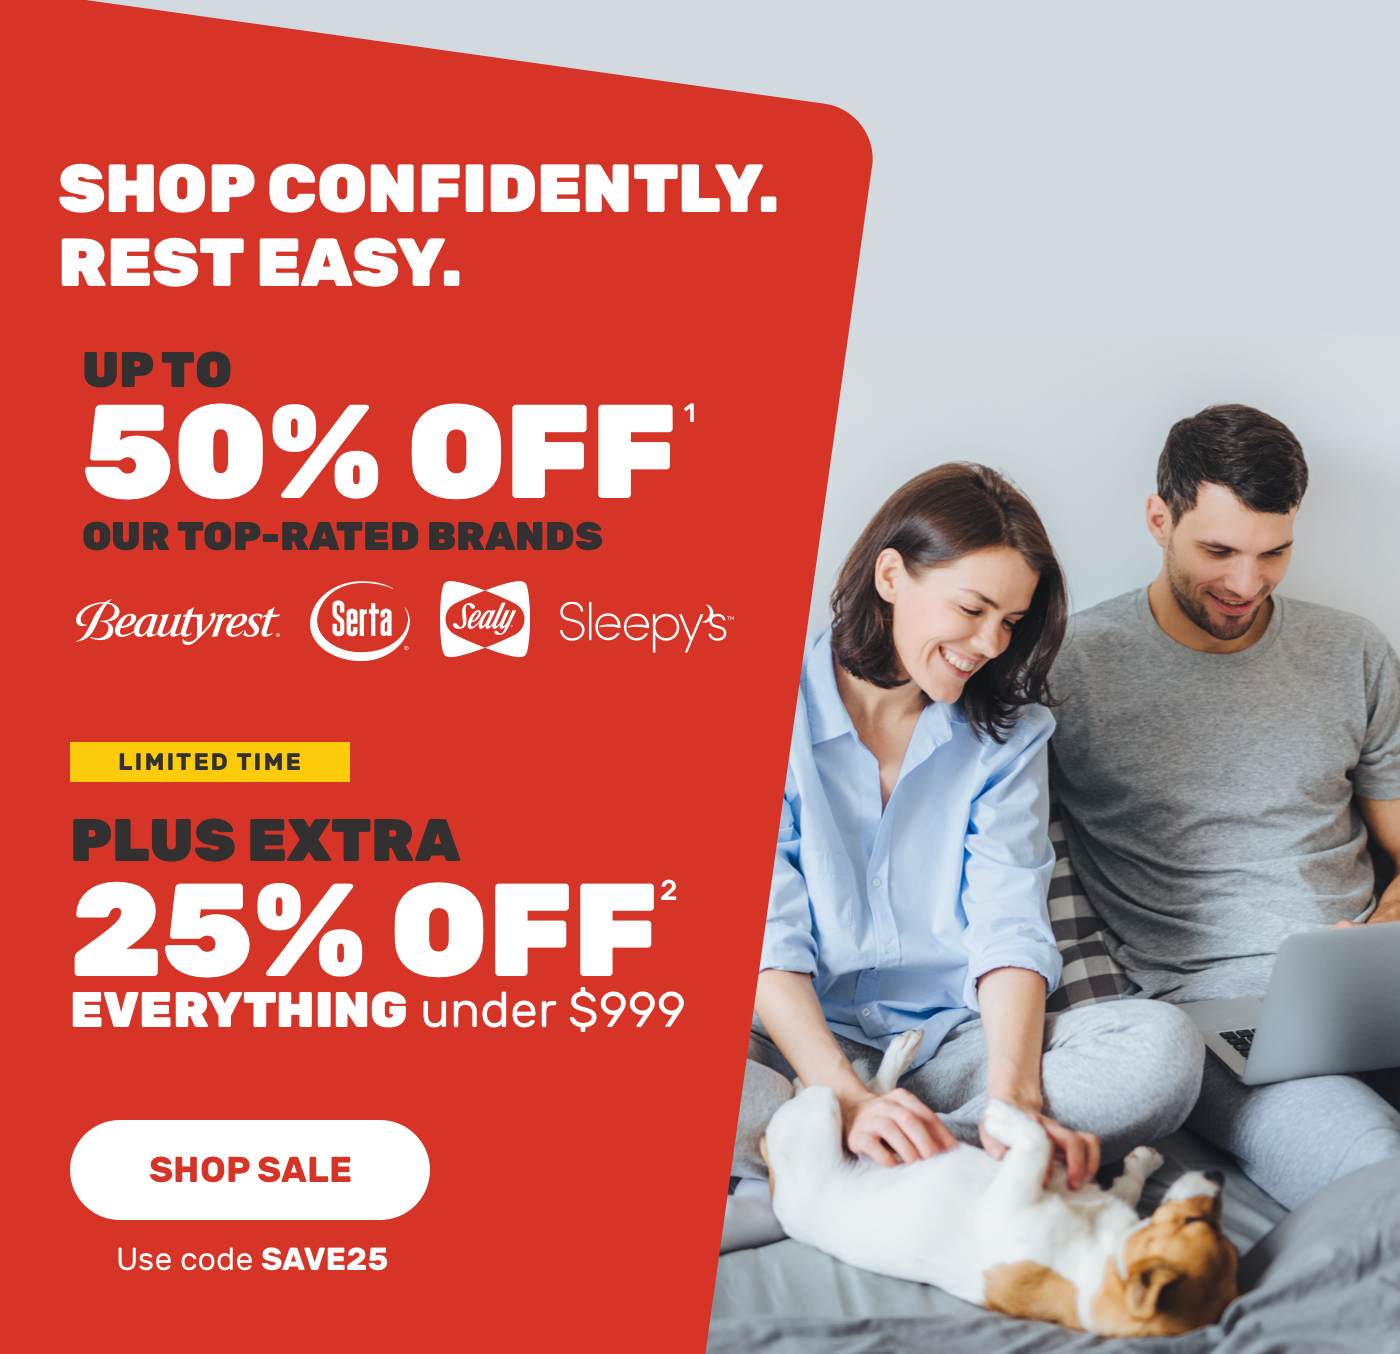 Shop Confidently.Rest easy.Upto 50% of top rated brands.Plus extra 25% off everything under $999.Shop Sale